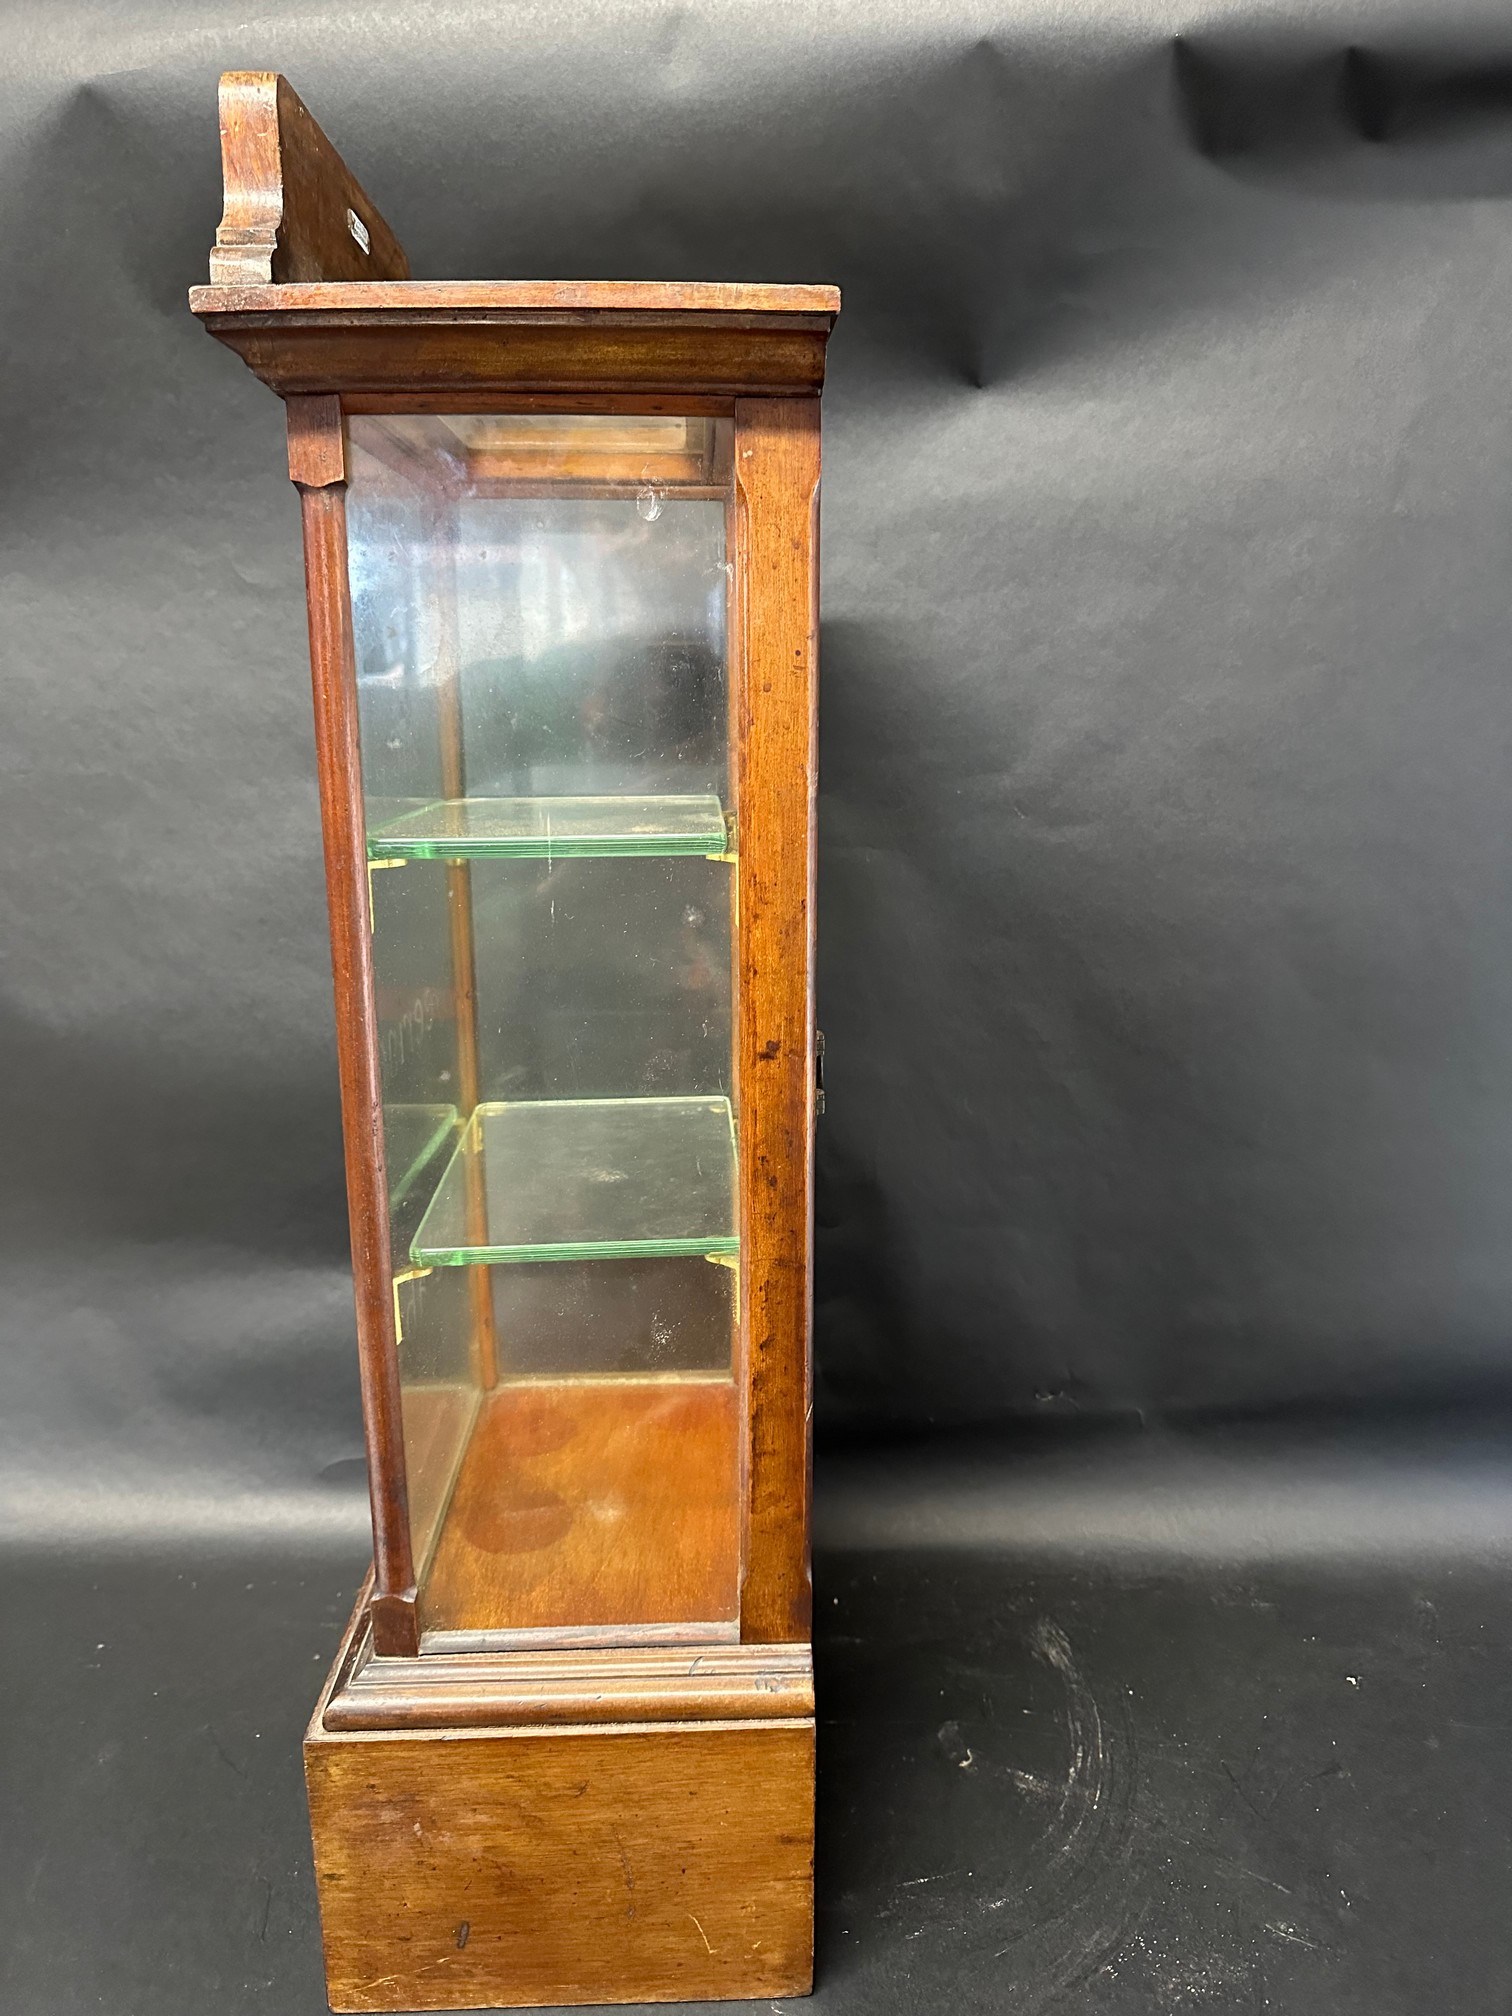 An Allen & Hanburys' Jujubes & Pastilles display cabinet with glass pediment and etched Voice, - Image 7 of 10